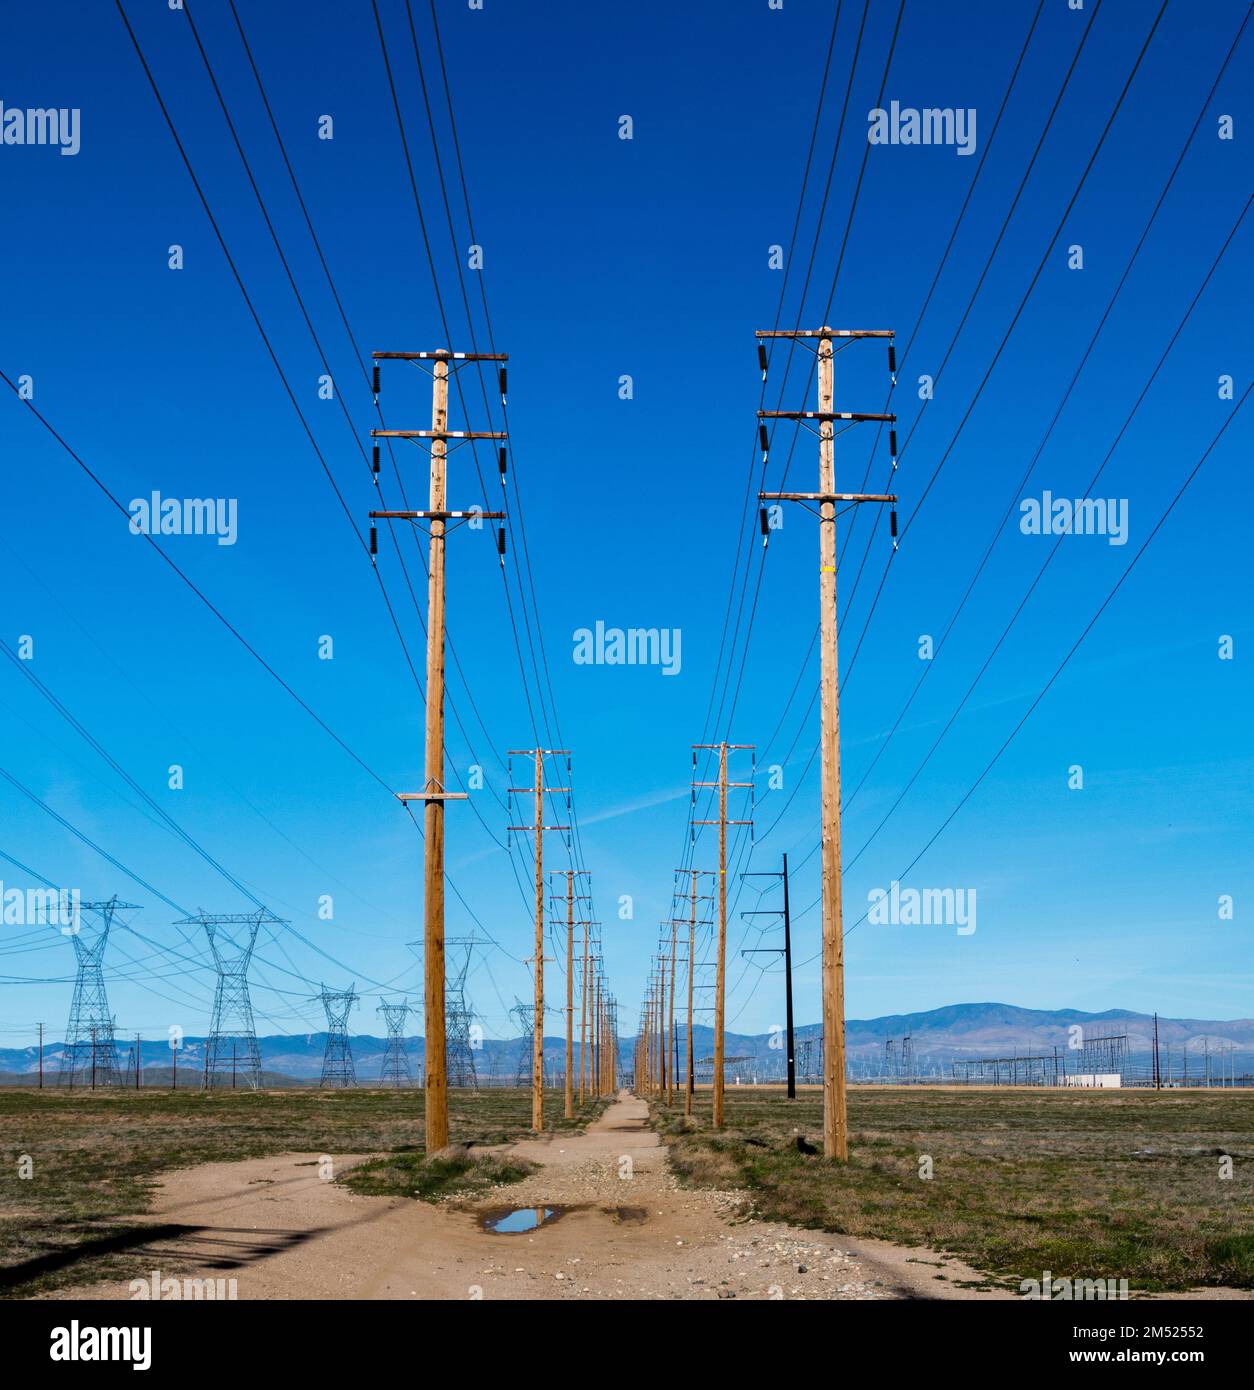 Wooden poles and power lines run in parallel into the distance on rigid flat la. Additional metal power poles are in the distance on the left. Stock Photo